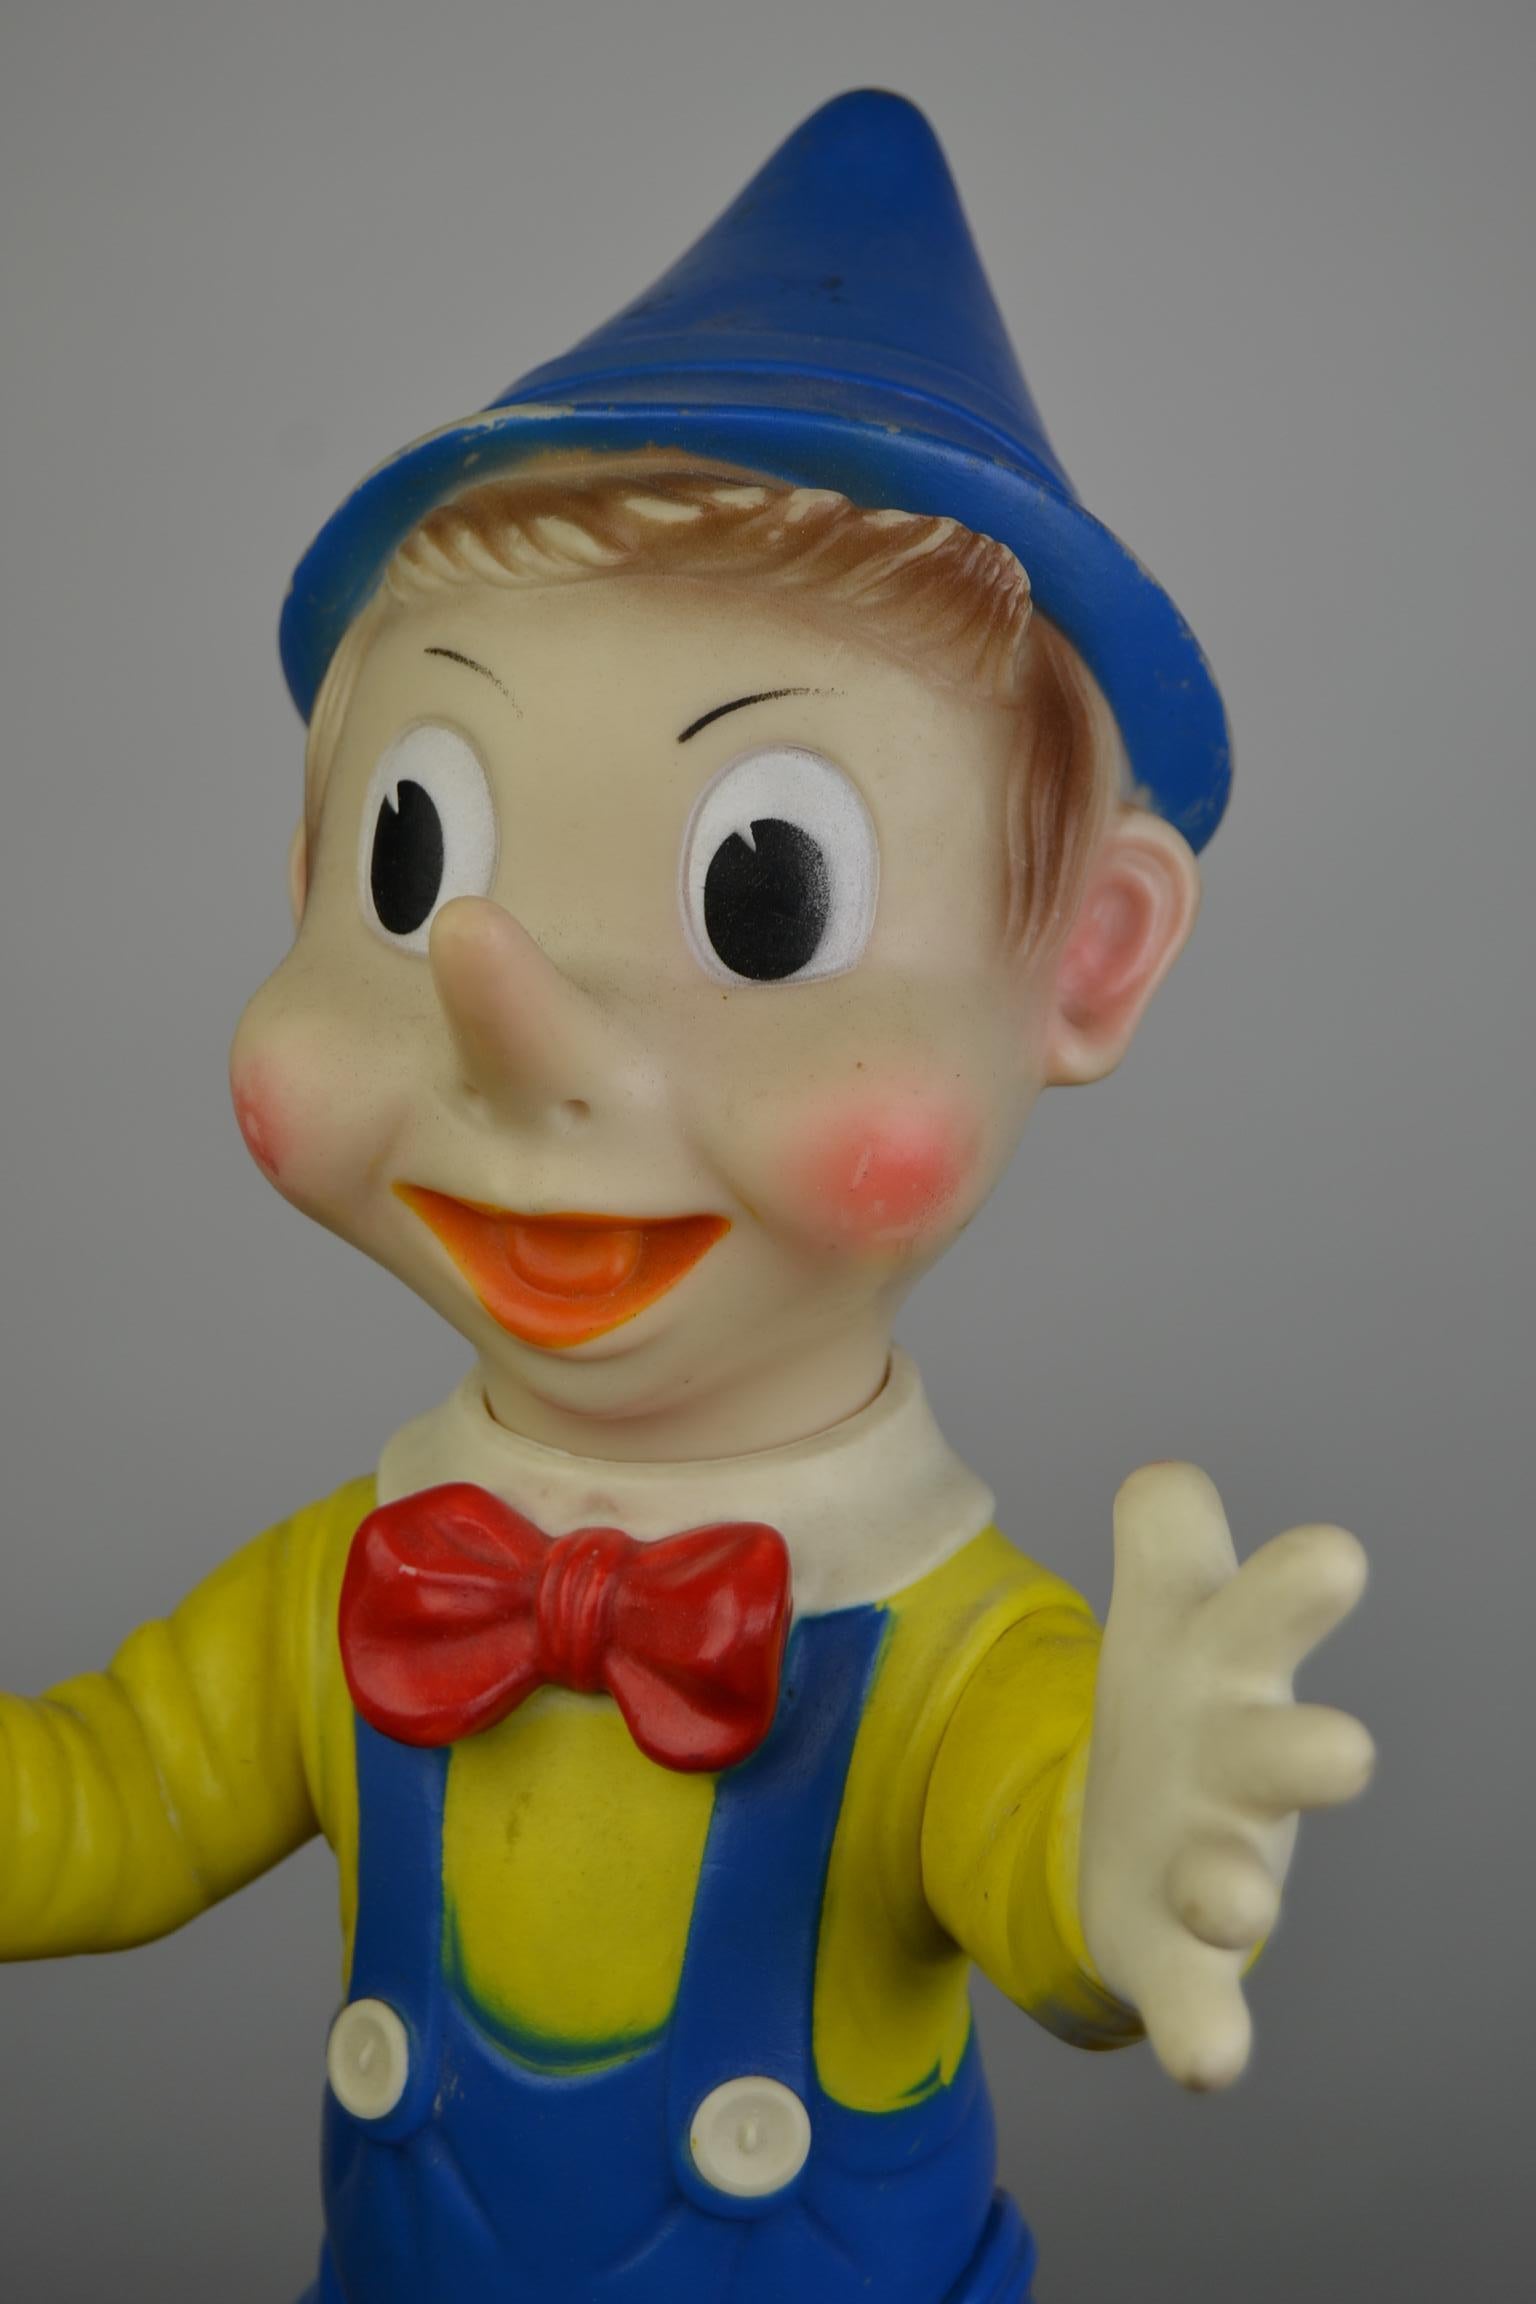 Mid-Century Modern Large Rubber Pinocchio Squeaky Toy by Ledraplastic Italy, 1960s